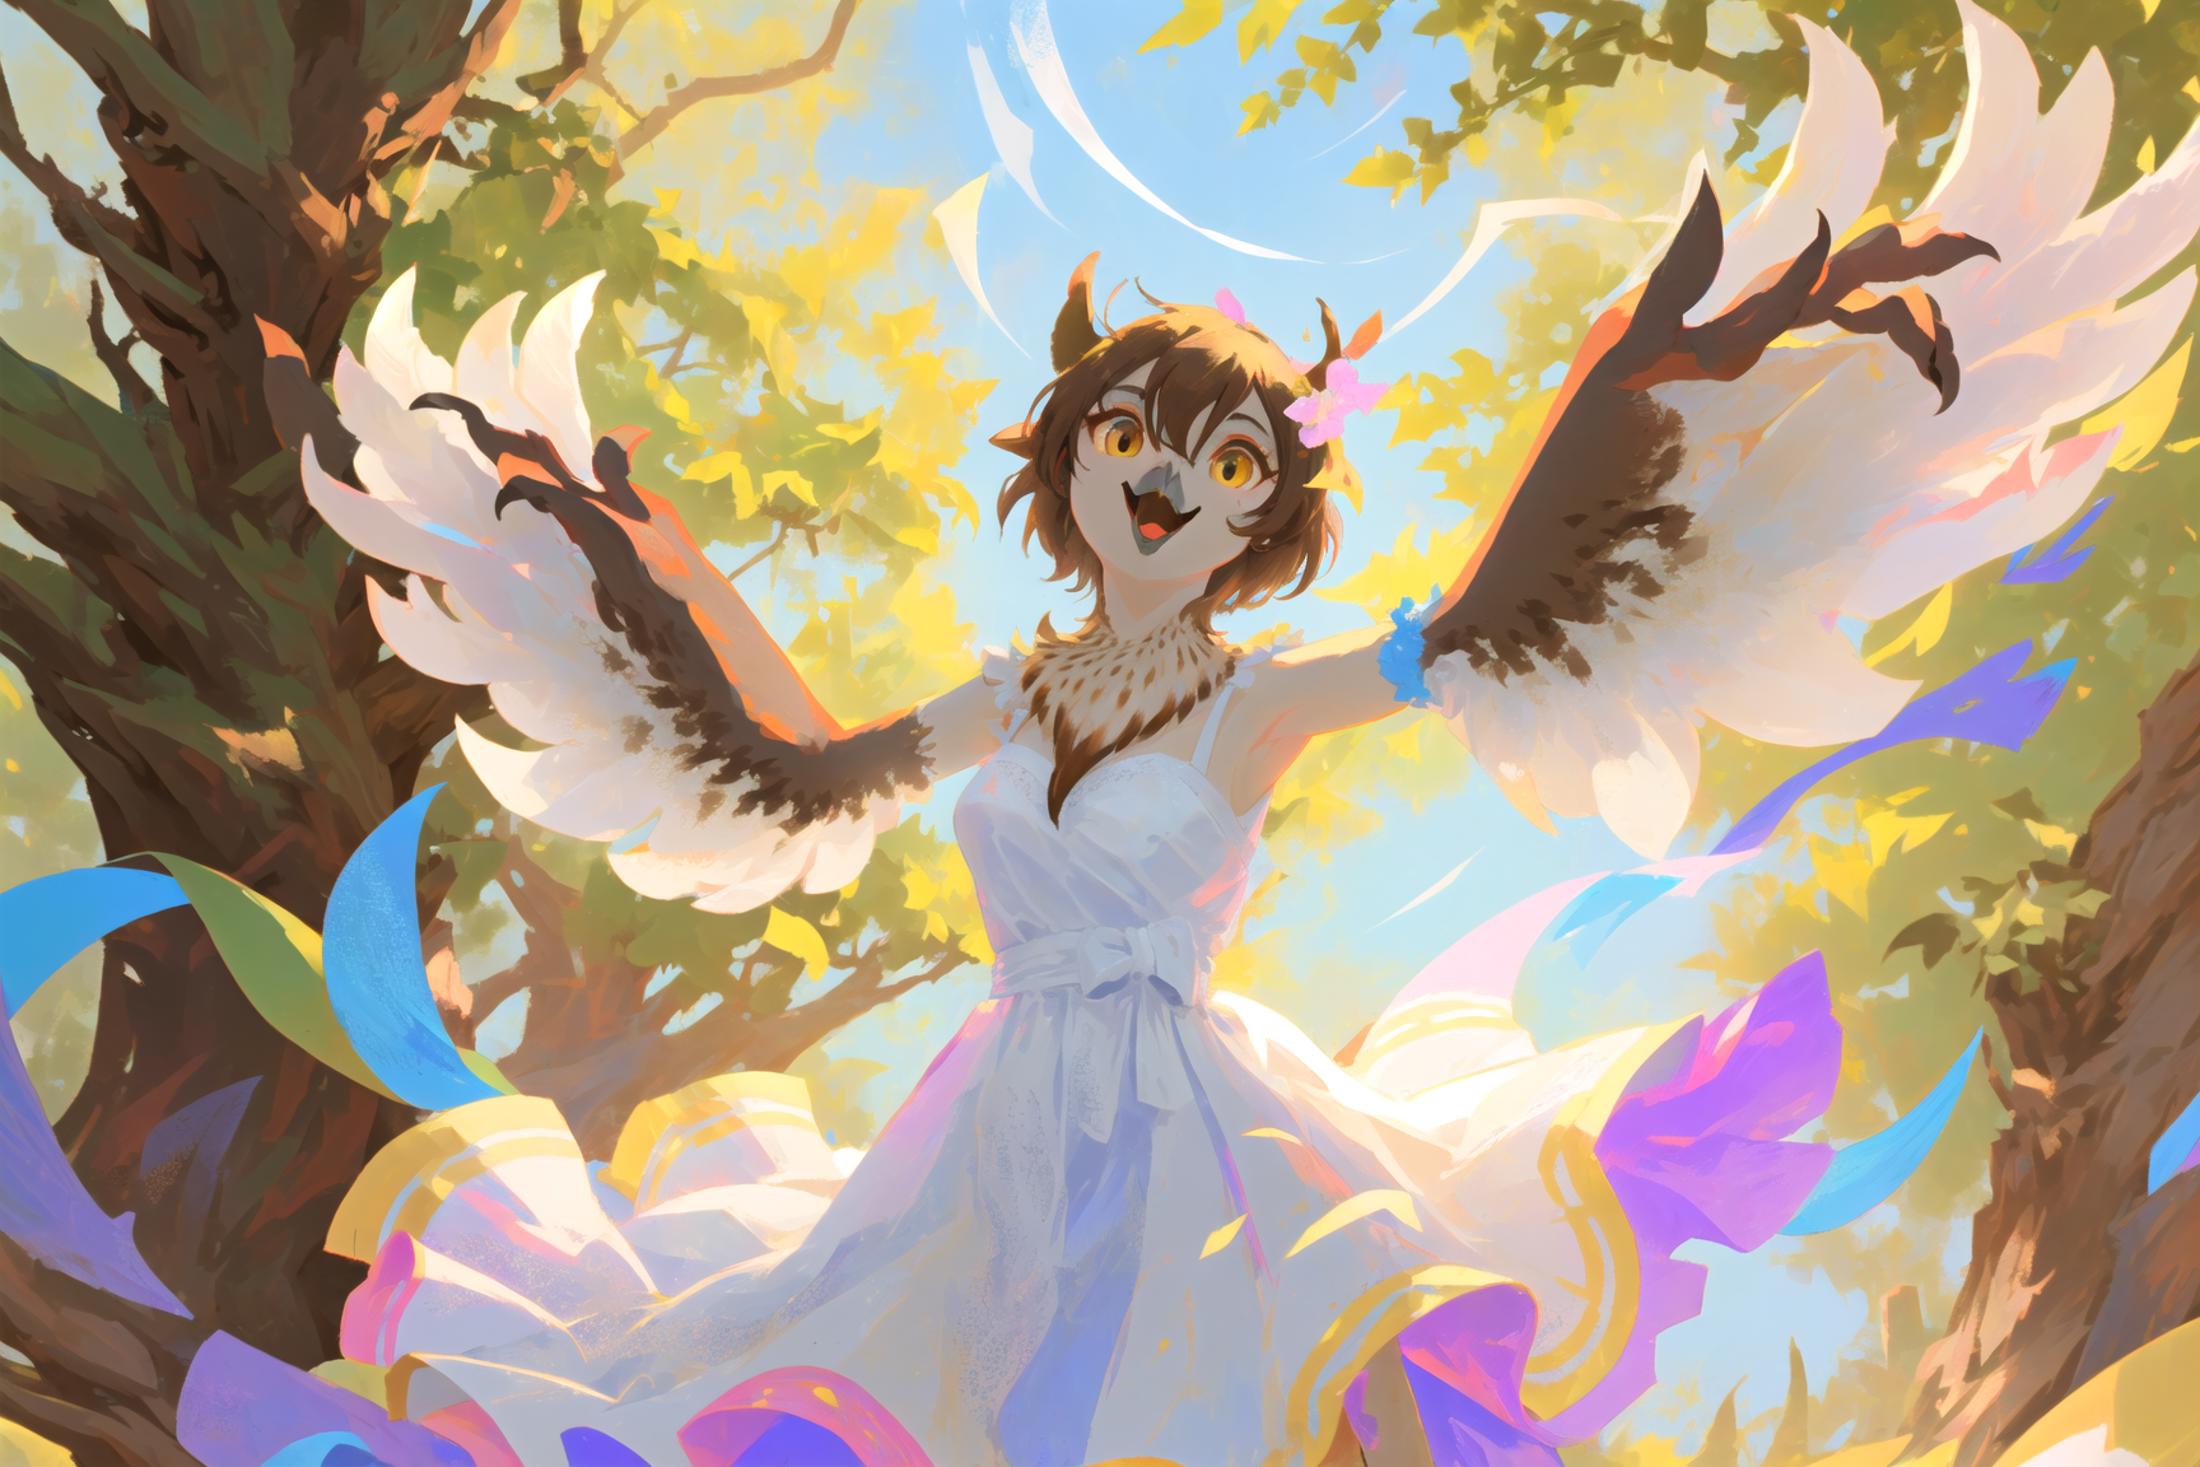 Anthro Birds LoRA image by Puffin